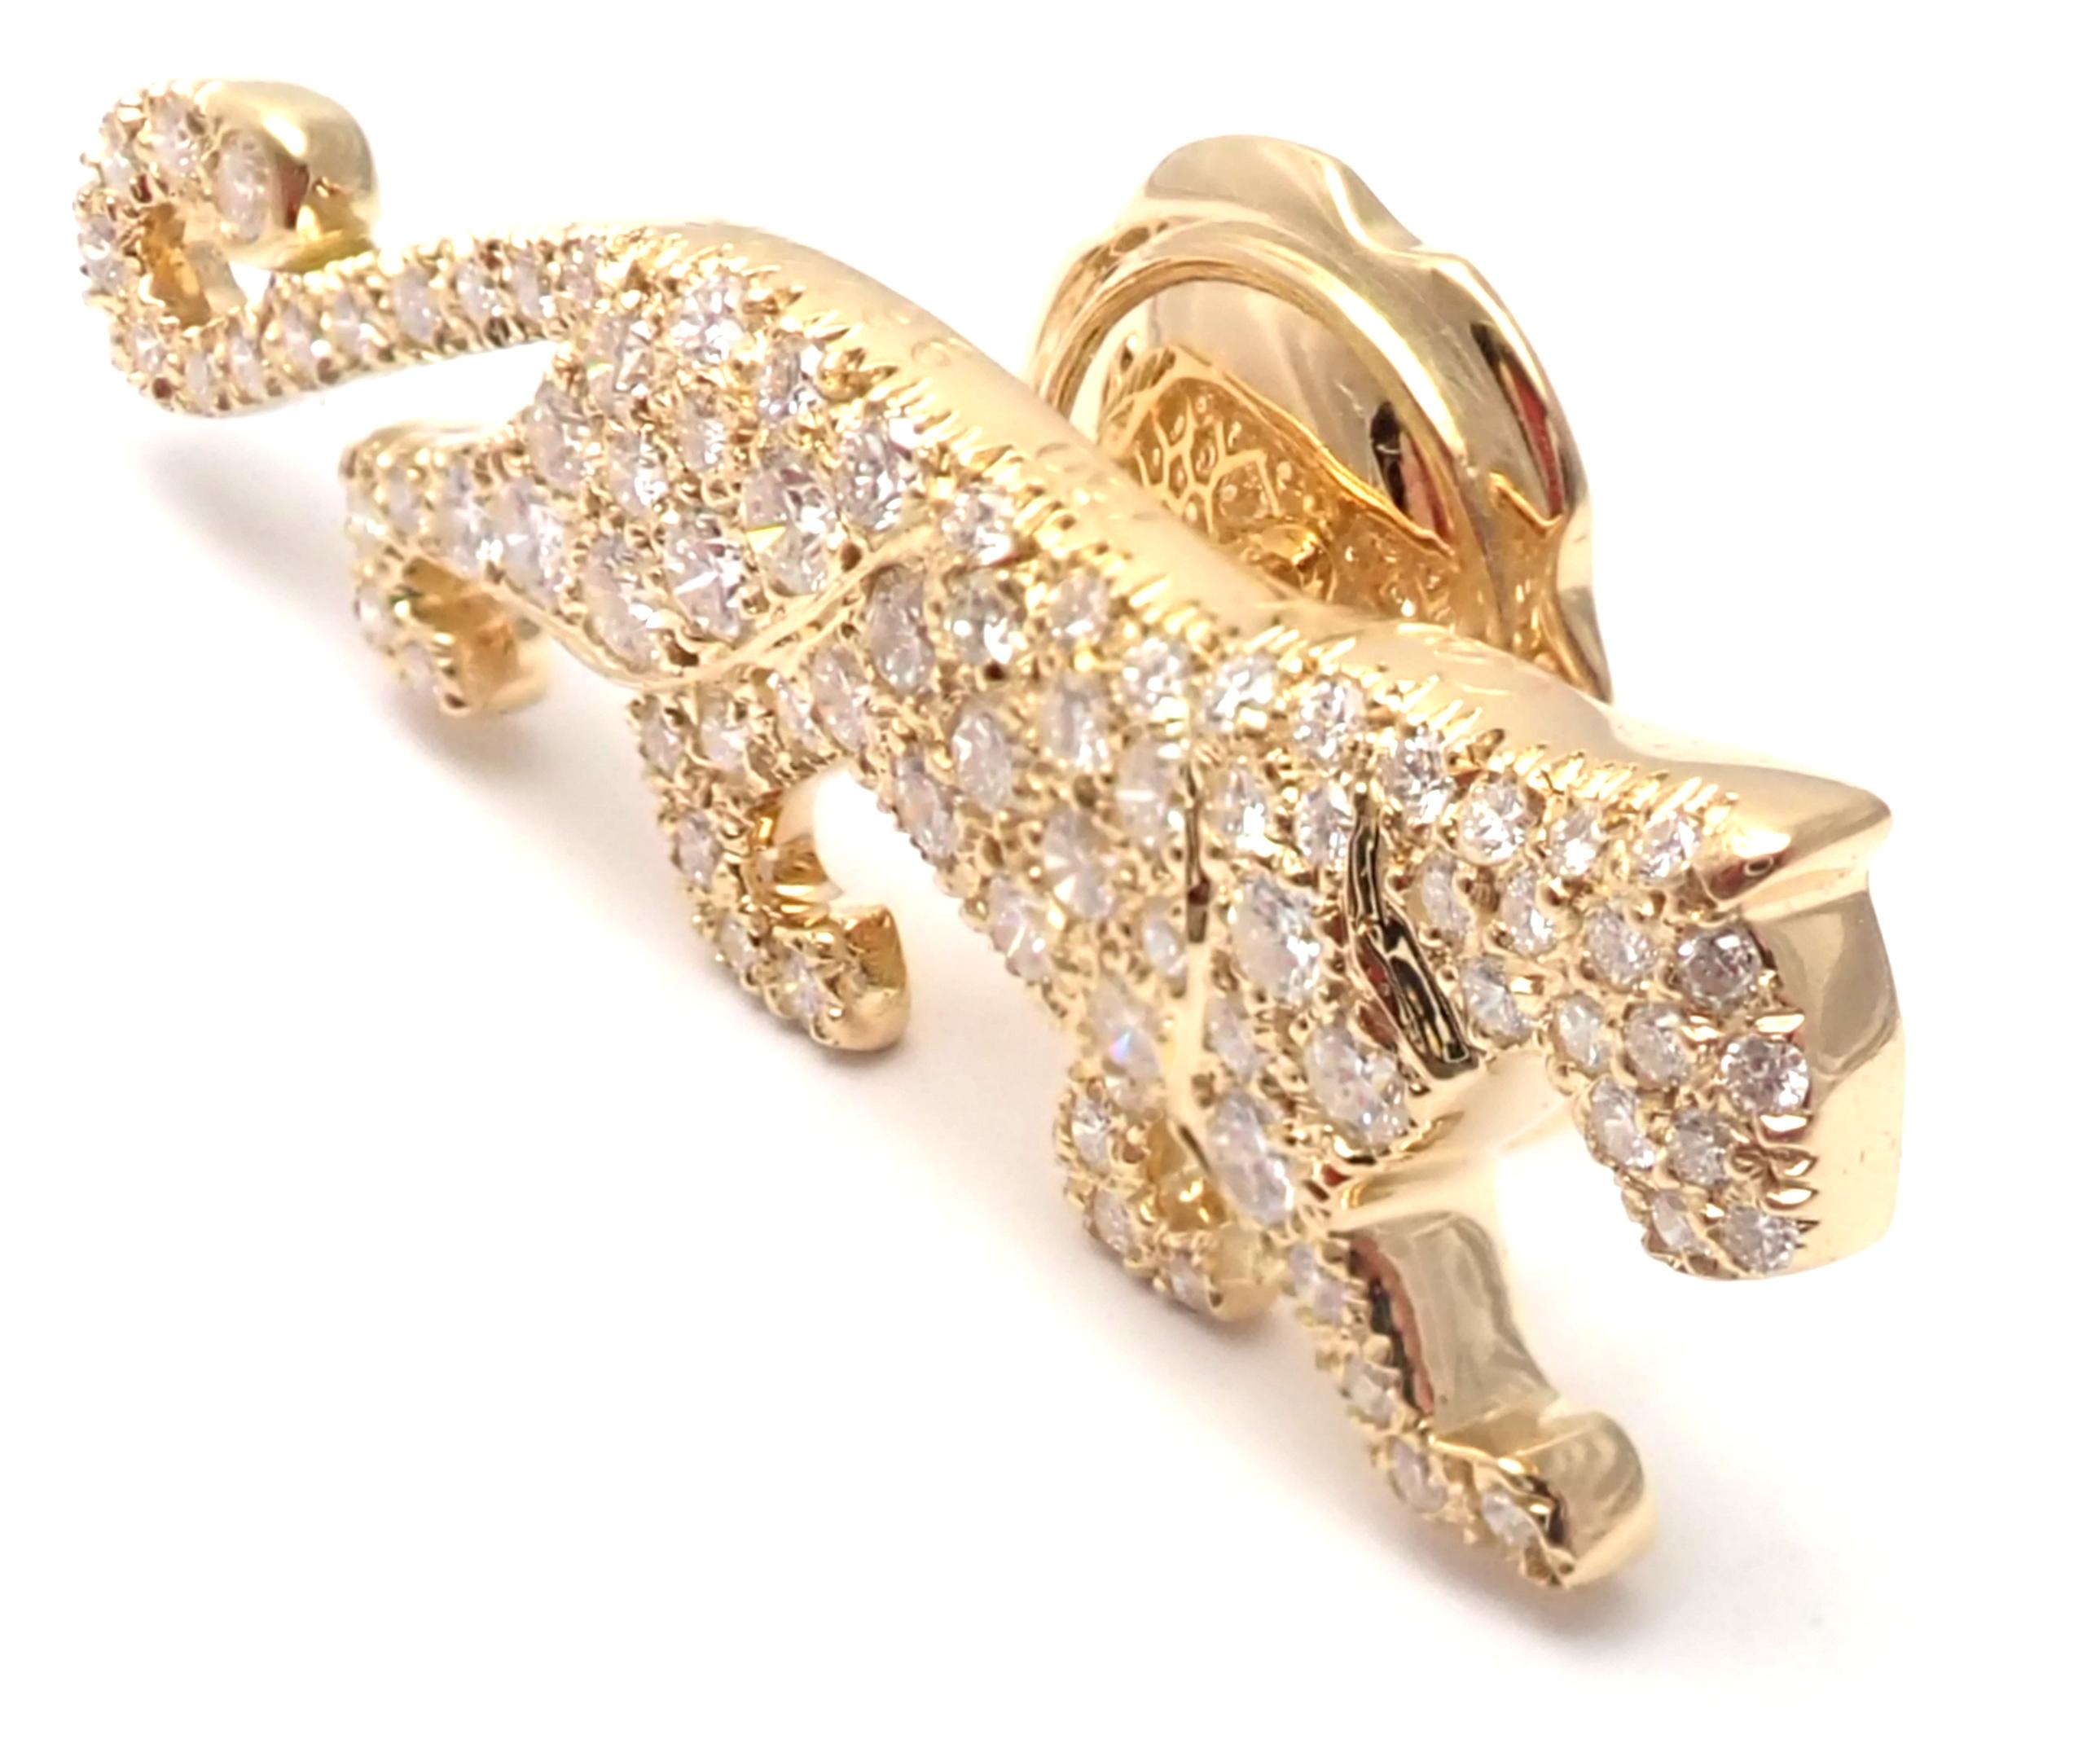 18k Yellow Gold Diamond Panther Tie Lapel Pin by Cartier. 
With Round brilliant cut diamonds VVS1 clarity E color.
This pin comes with Cartier box and Cartier service paper.
Details:
Measurements: 34mm x 11mm
Weight: 4.1 grams
Stamped Hallmarks: